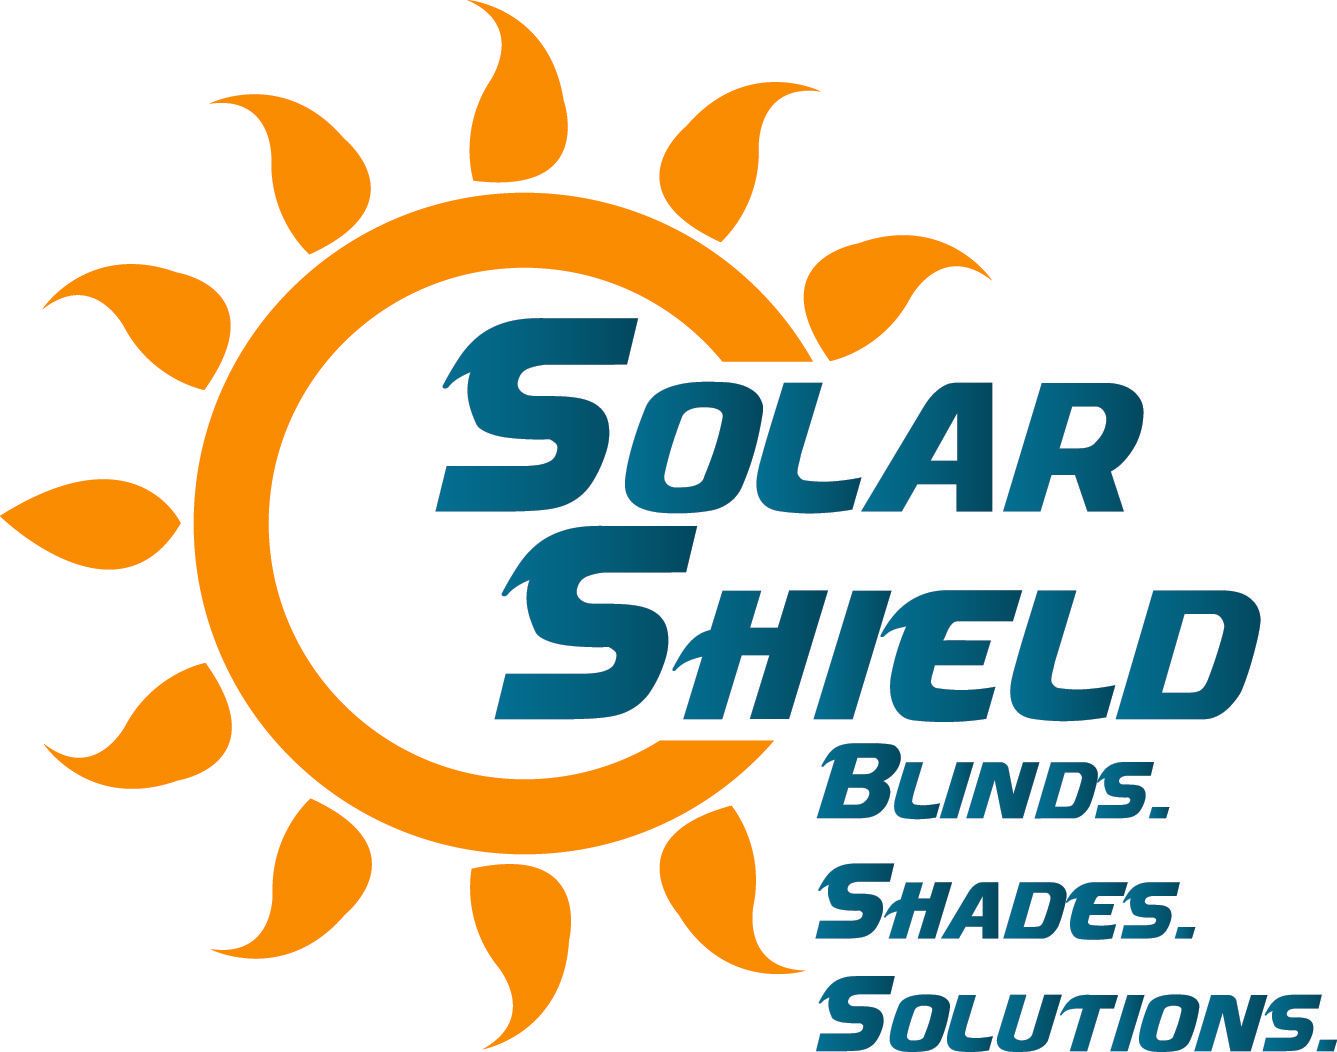 A logo for solar shield blinds shades and solutions